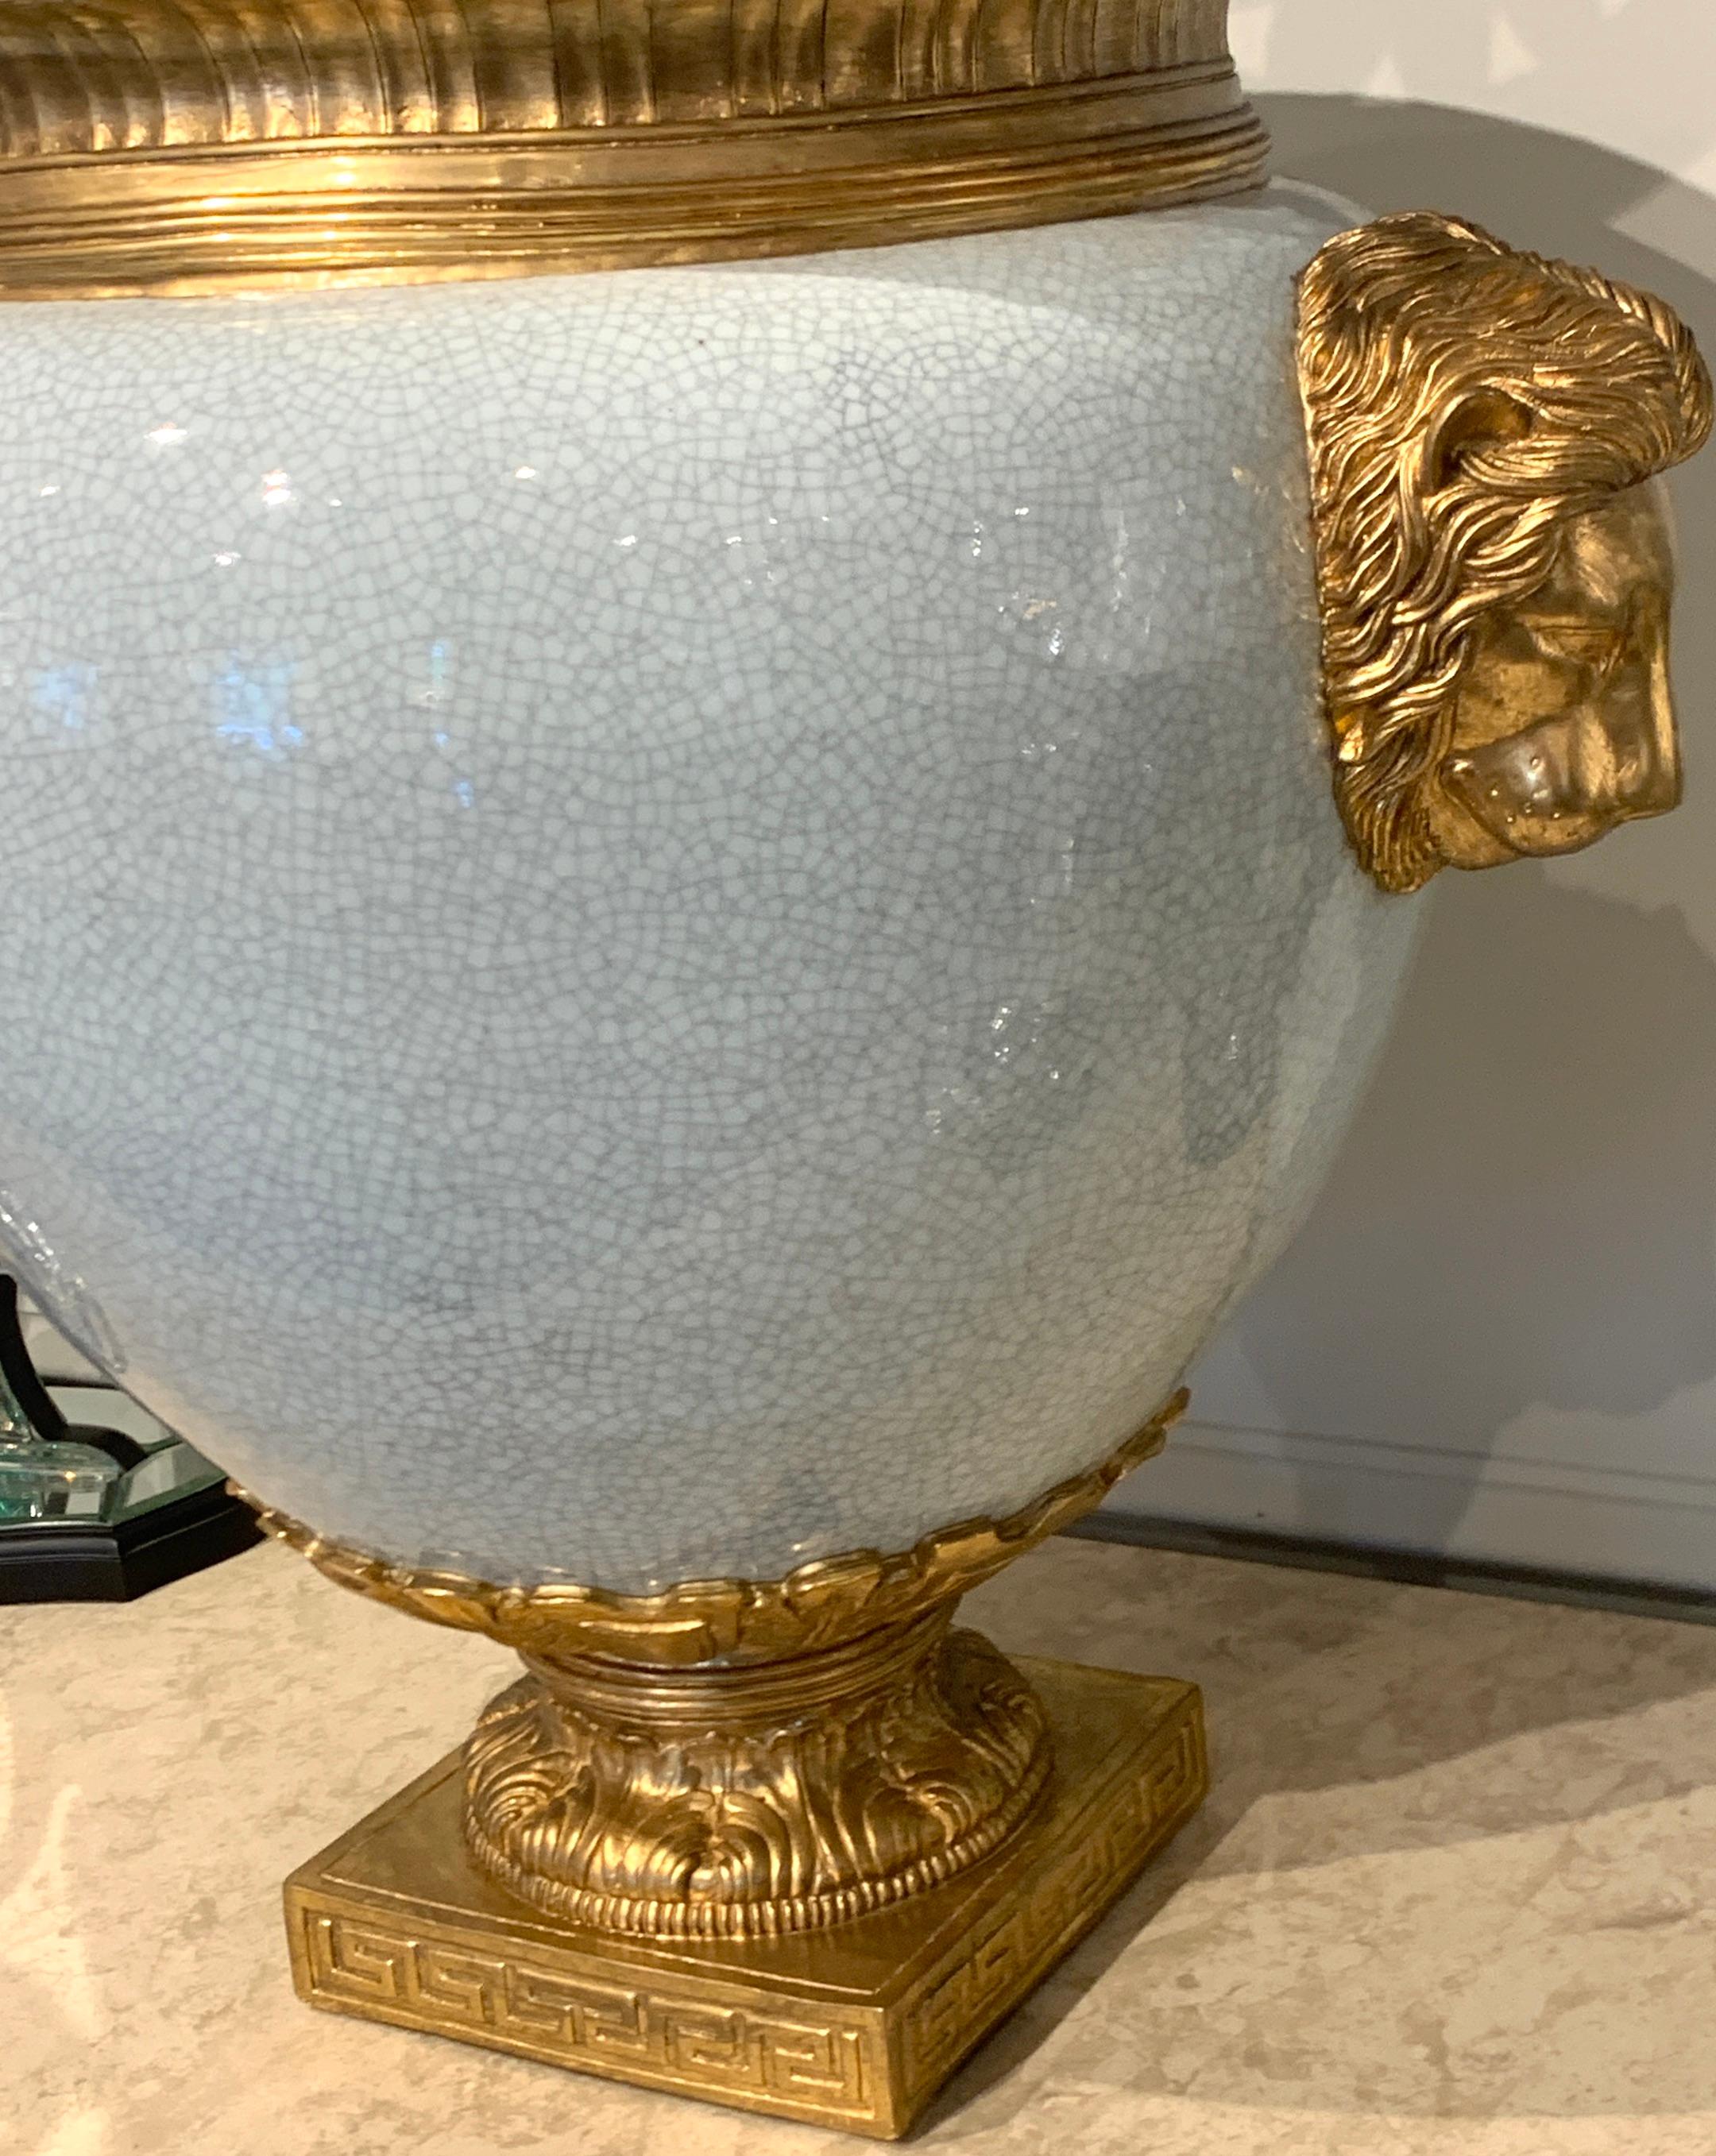 Chinese Crackle Glaze and Ormolu Lion Motif Urn In Good Condition For Sale In Atlanta, GA